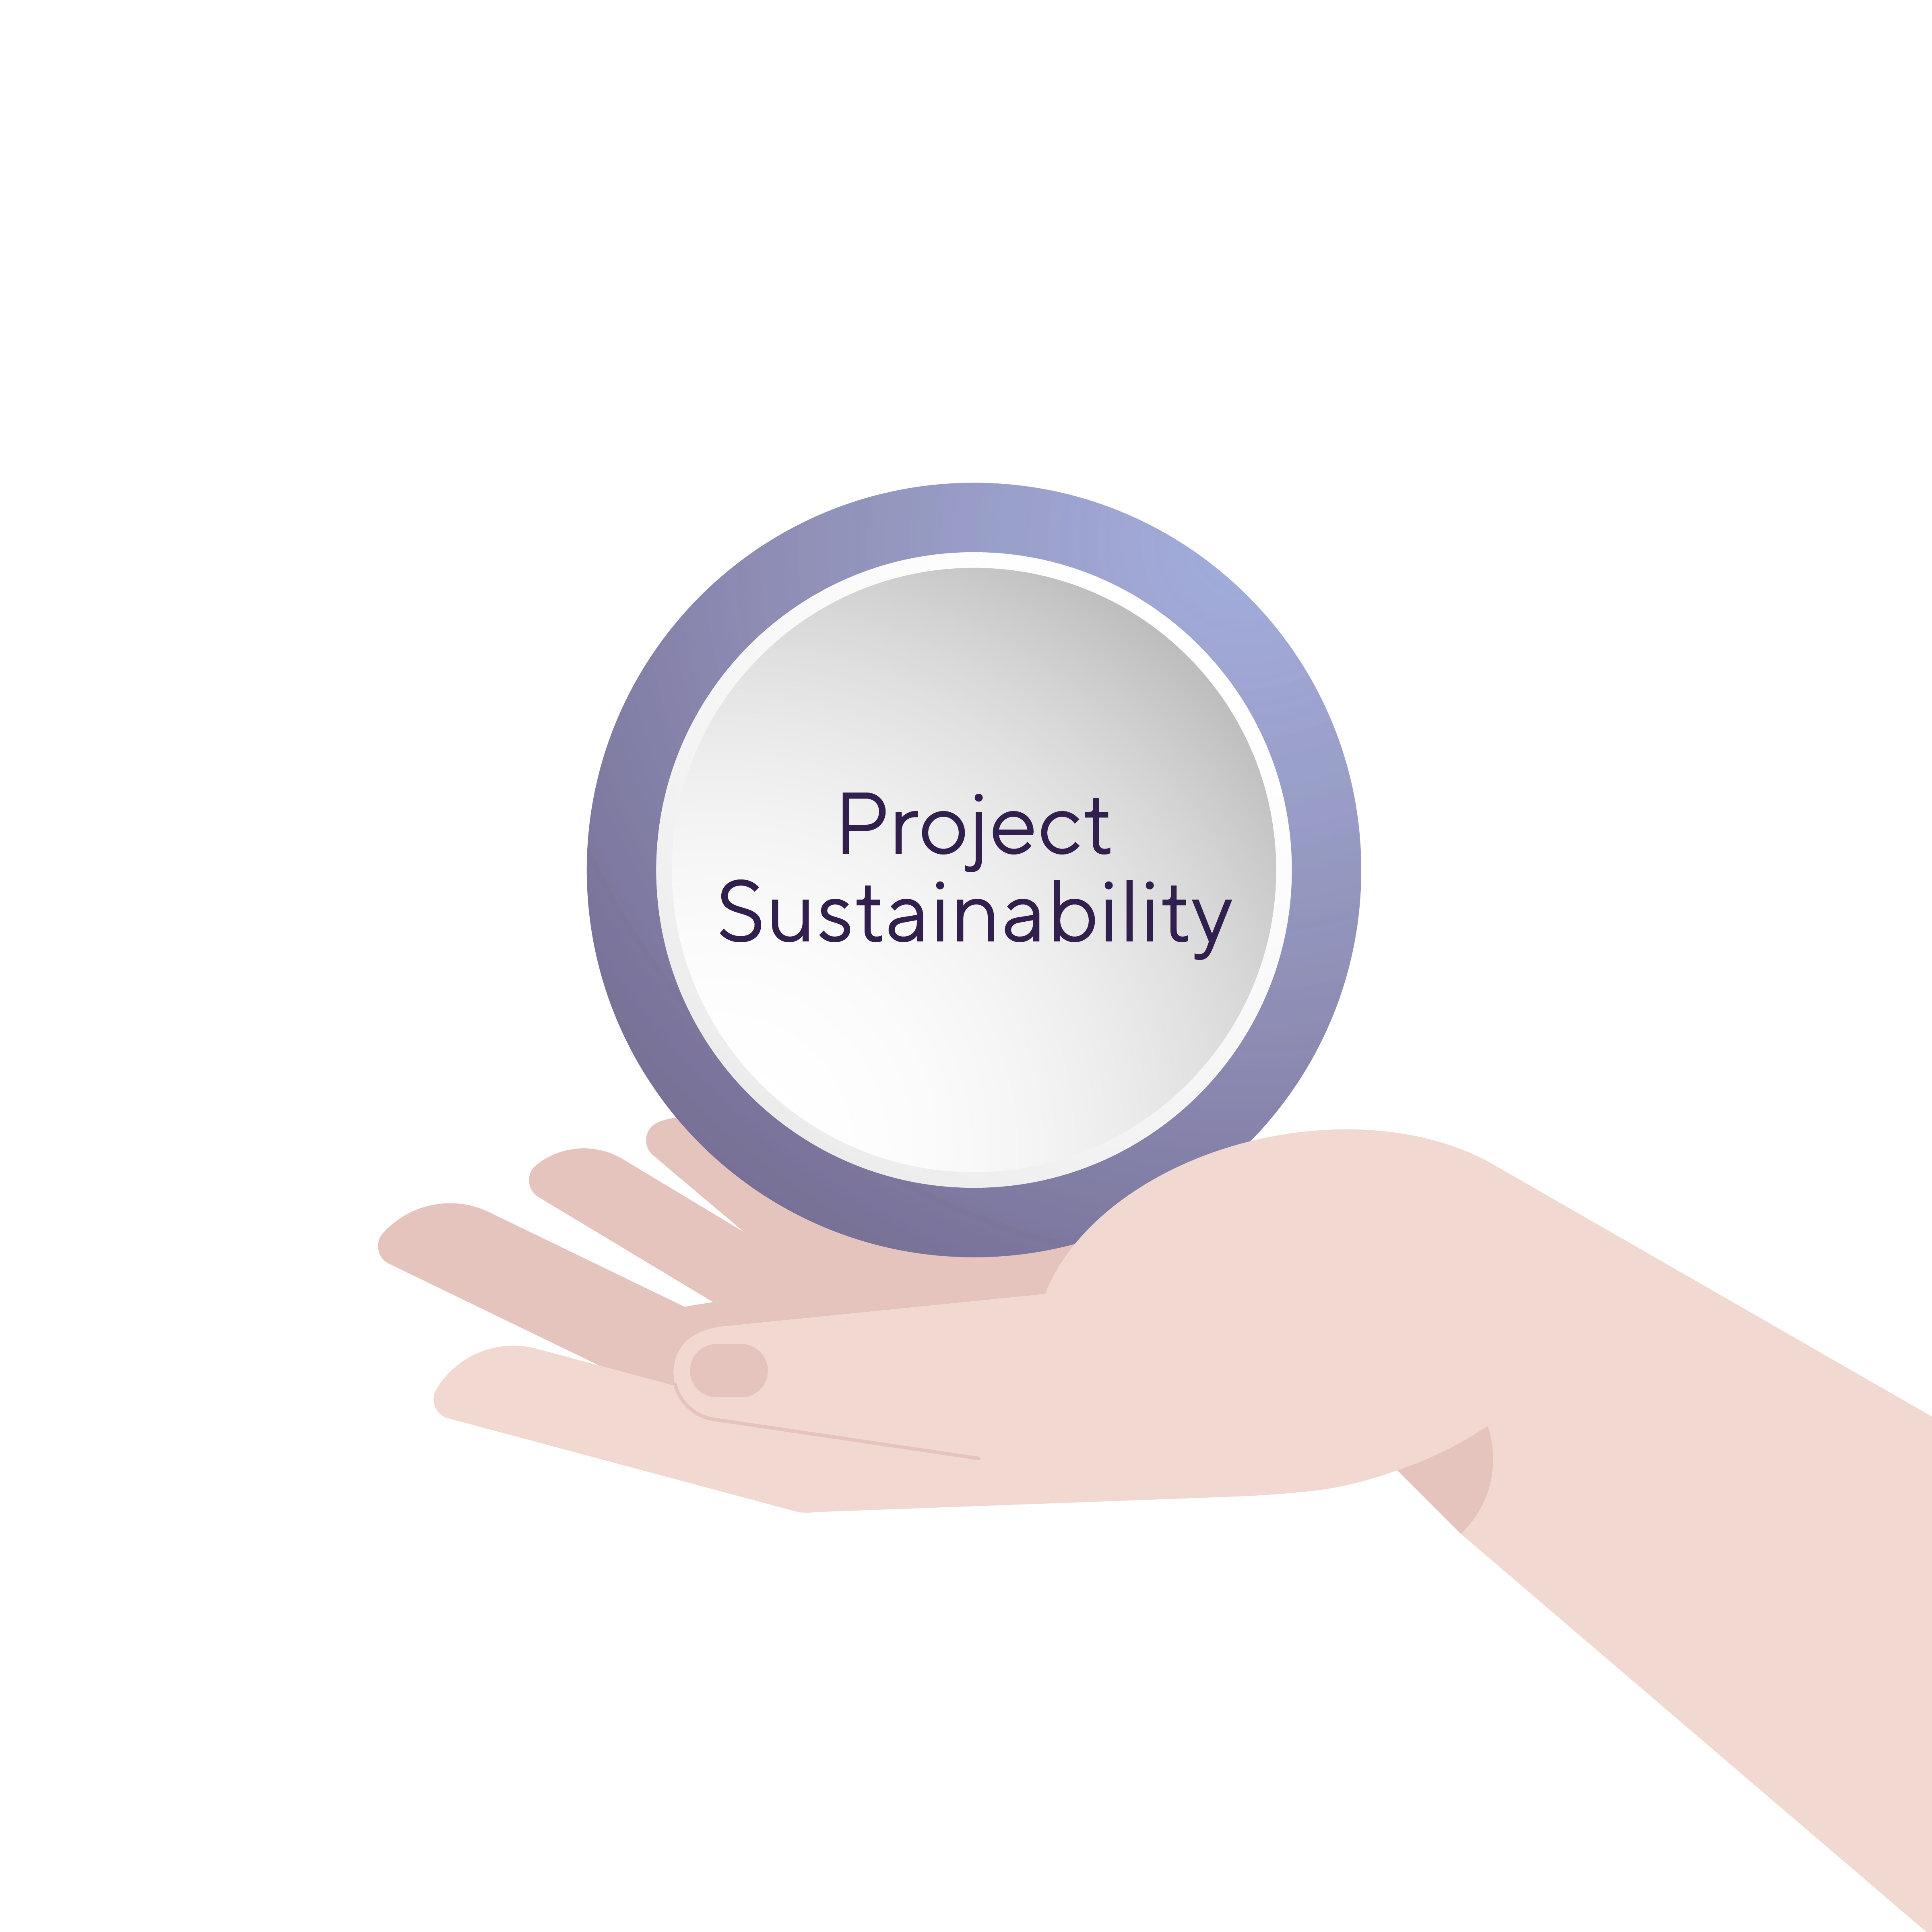 The ATHENA project consortium is implementing its sustainability strategy to ensure the replication of GEPs and project outcomes